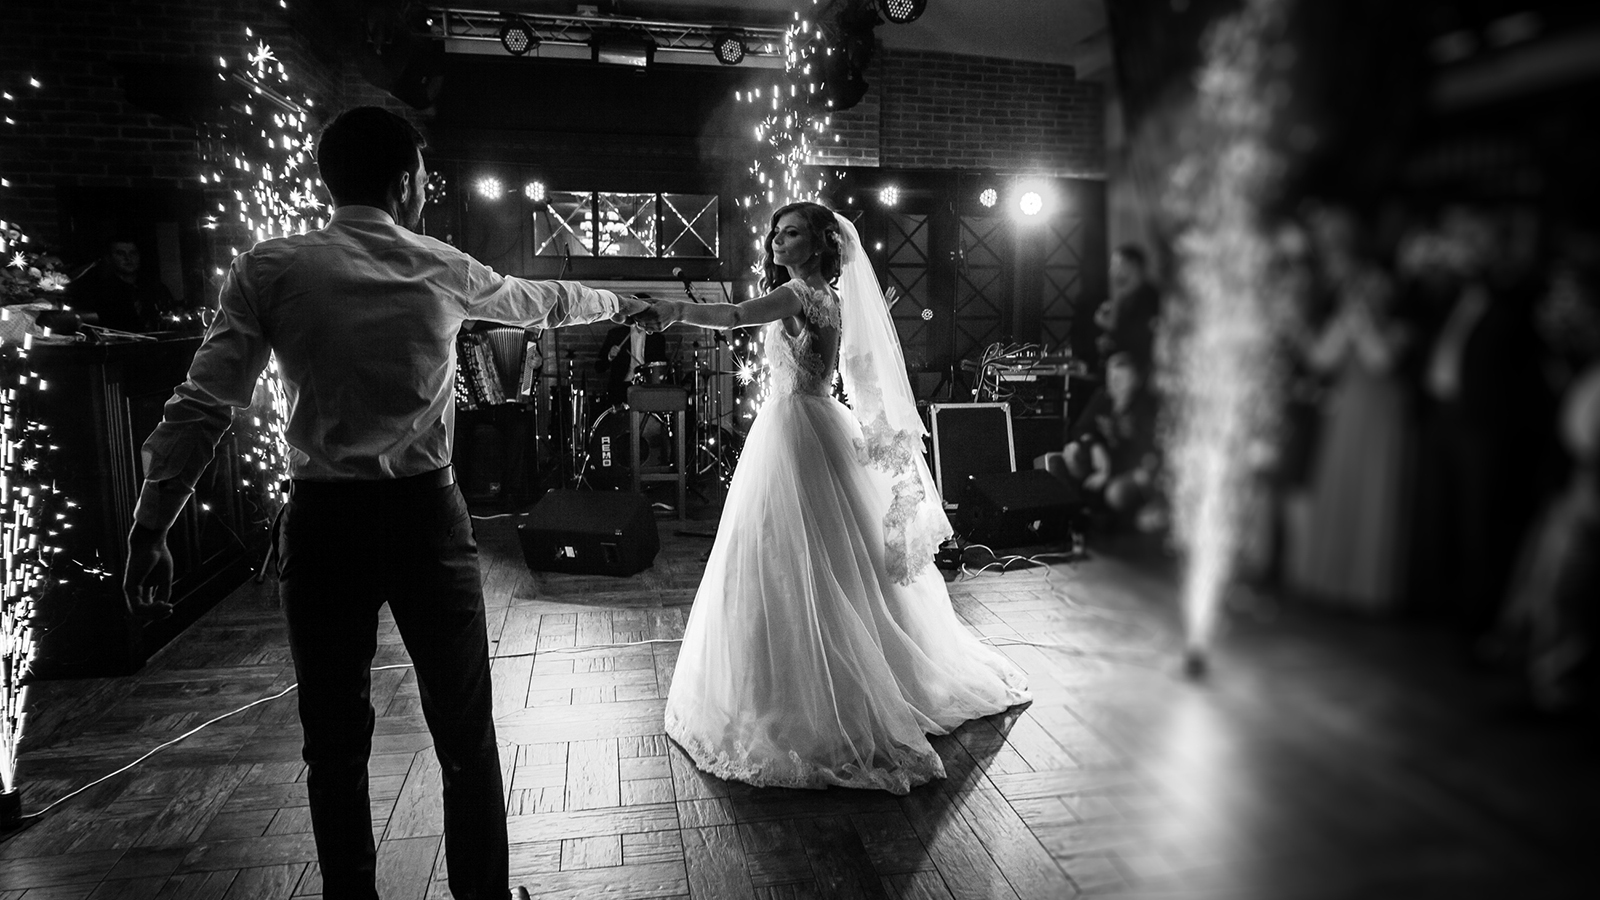 Beautiful newlywed couple first dance at wedding reception surrounded by smoke and lights and sparks b&w